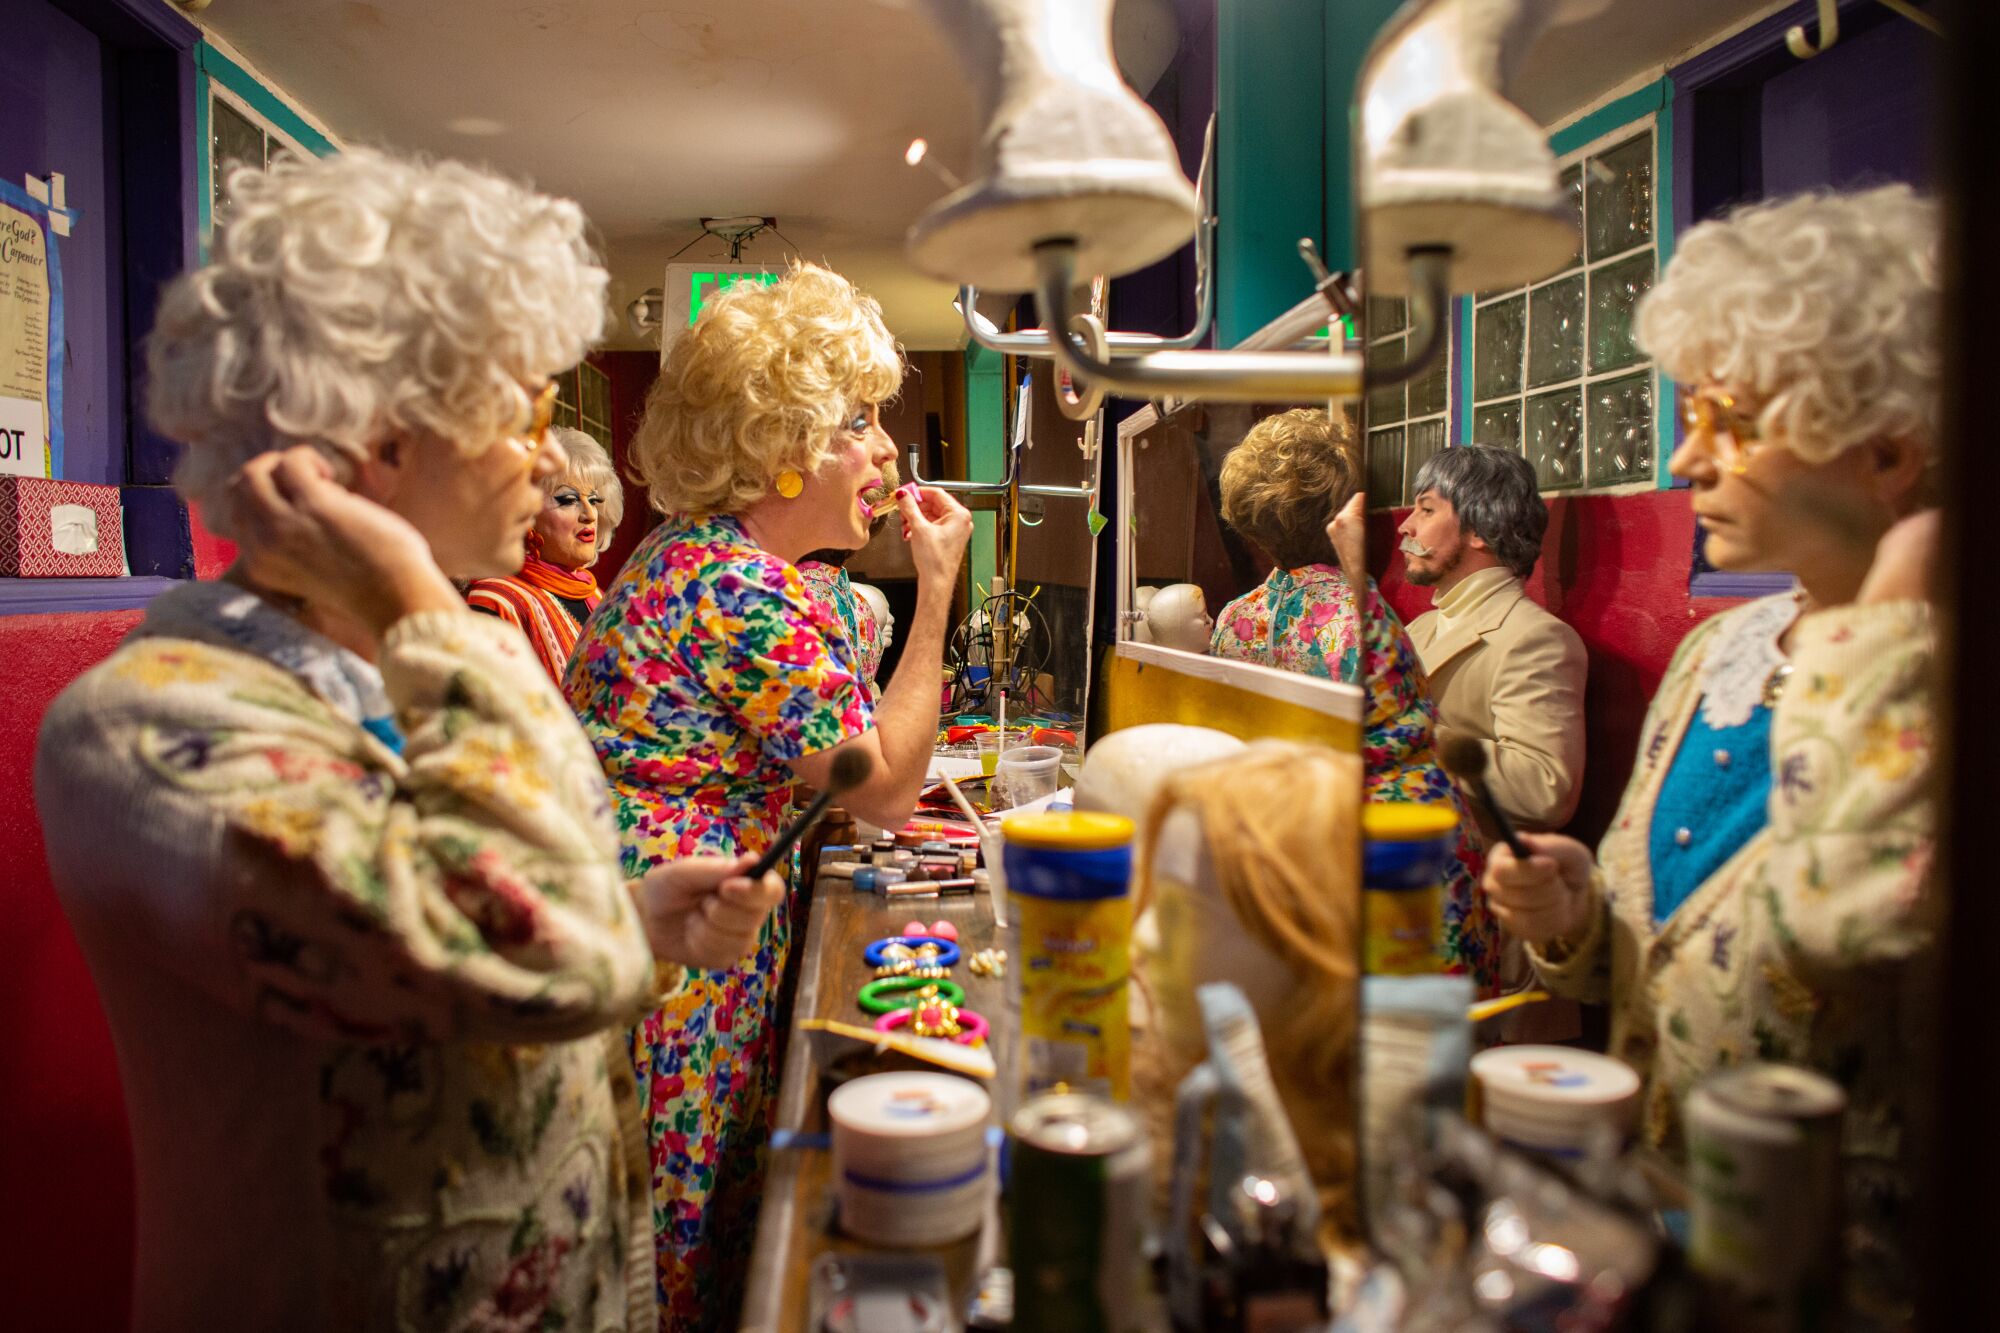 The cast touches up their makeup and hair backstage before the show.